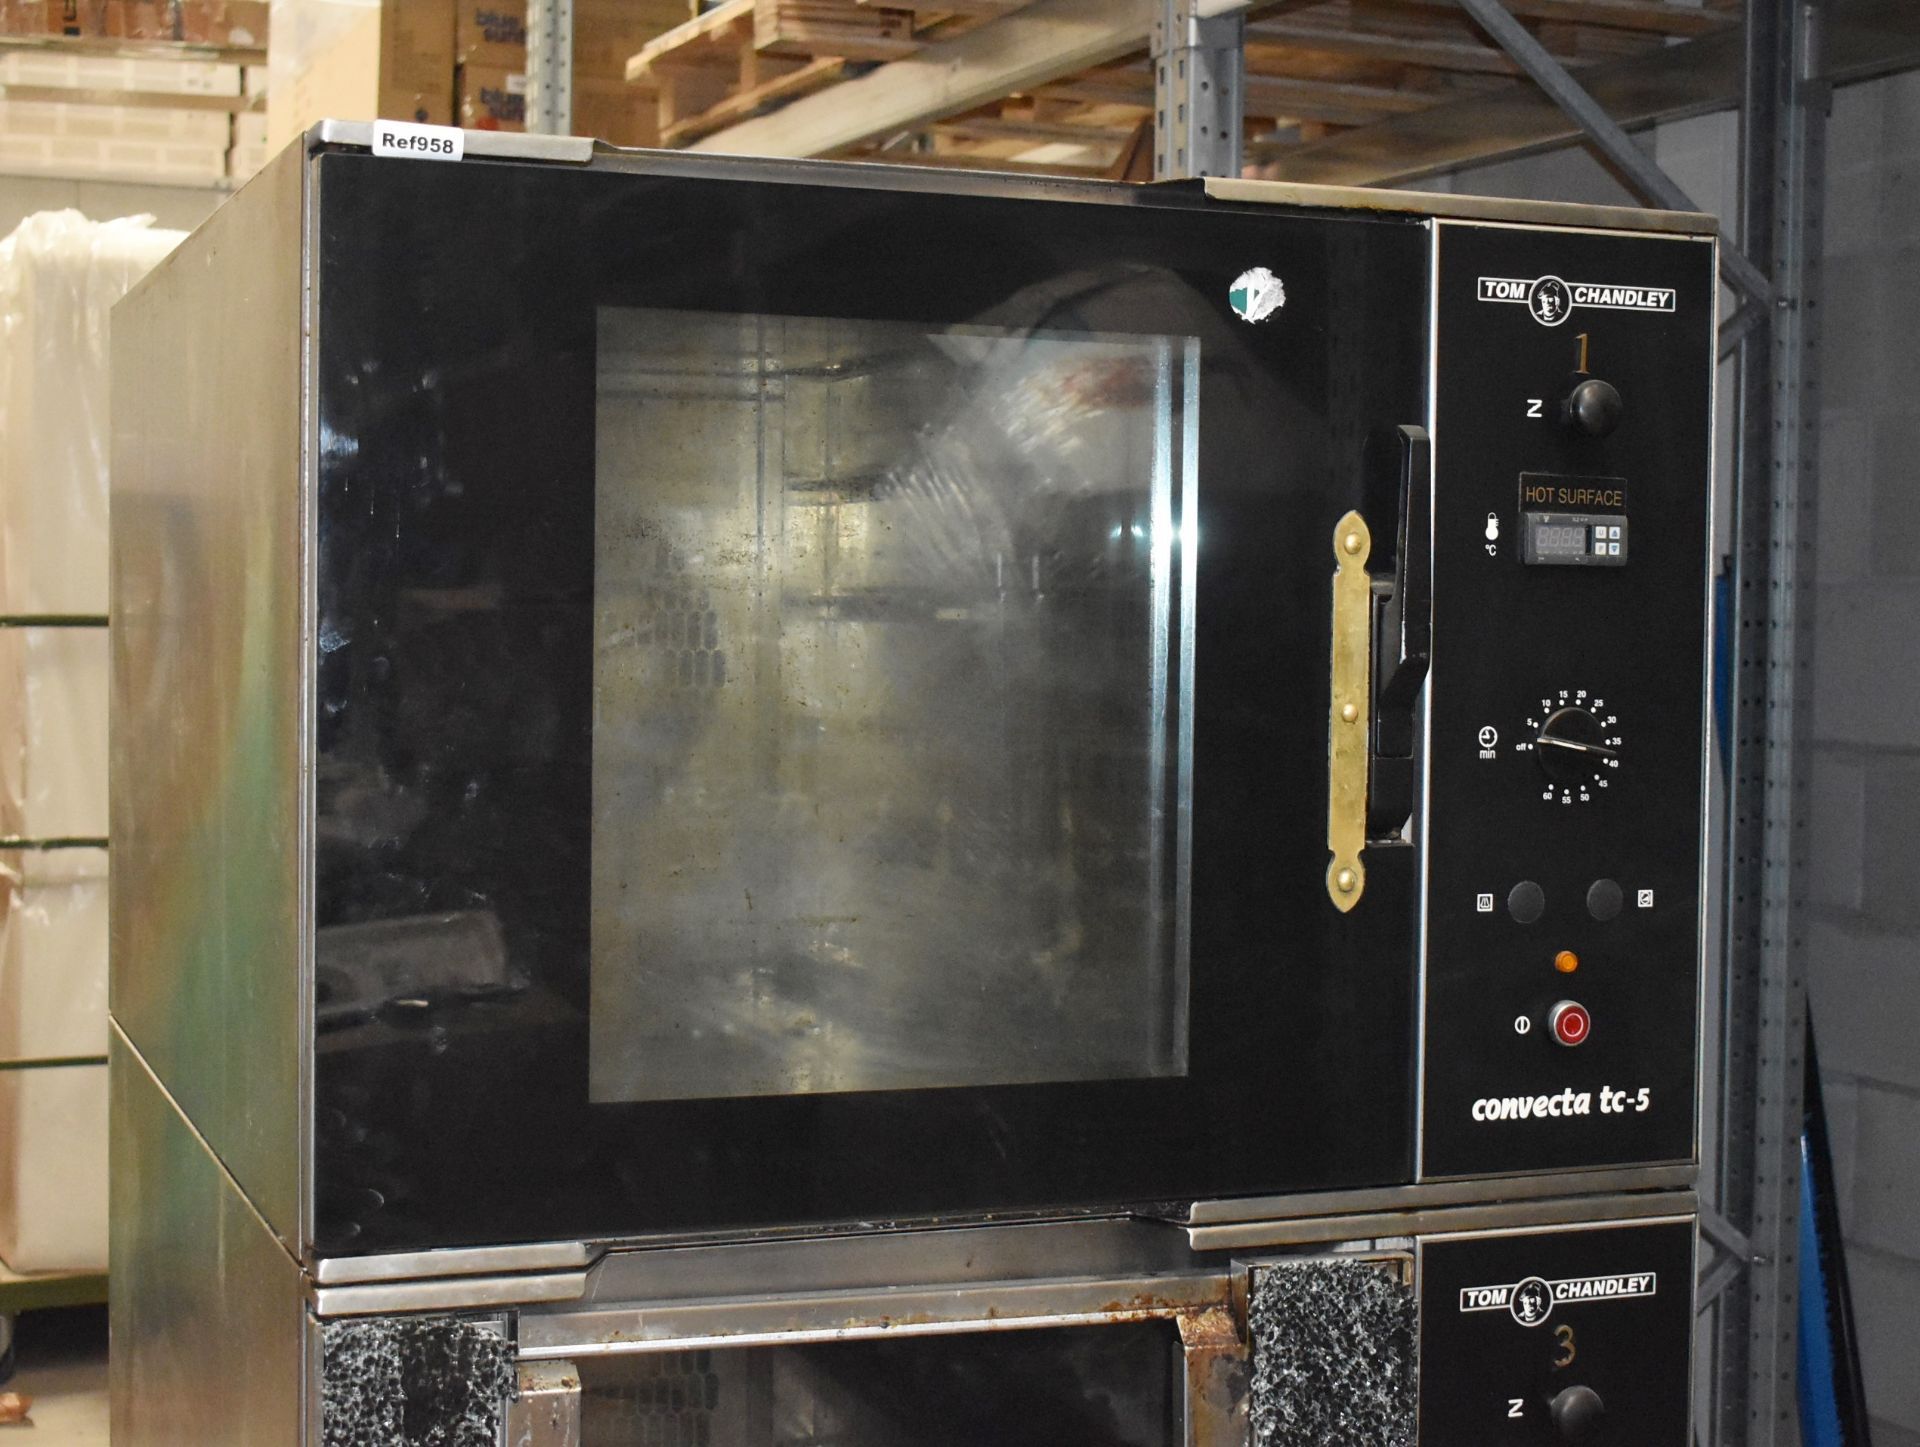 1 x Tom Chandley Double Door Bakey Oven - 3 Phase - Model TC53018 - Removed From Well Known - Image 6 of 8